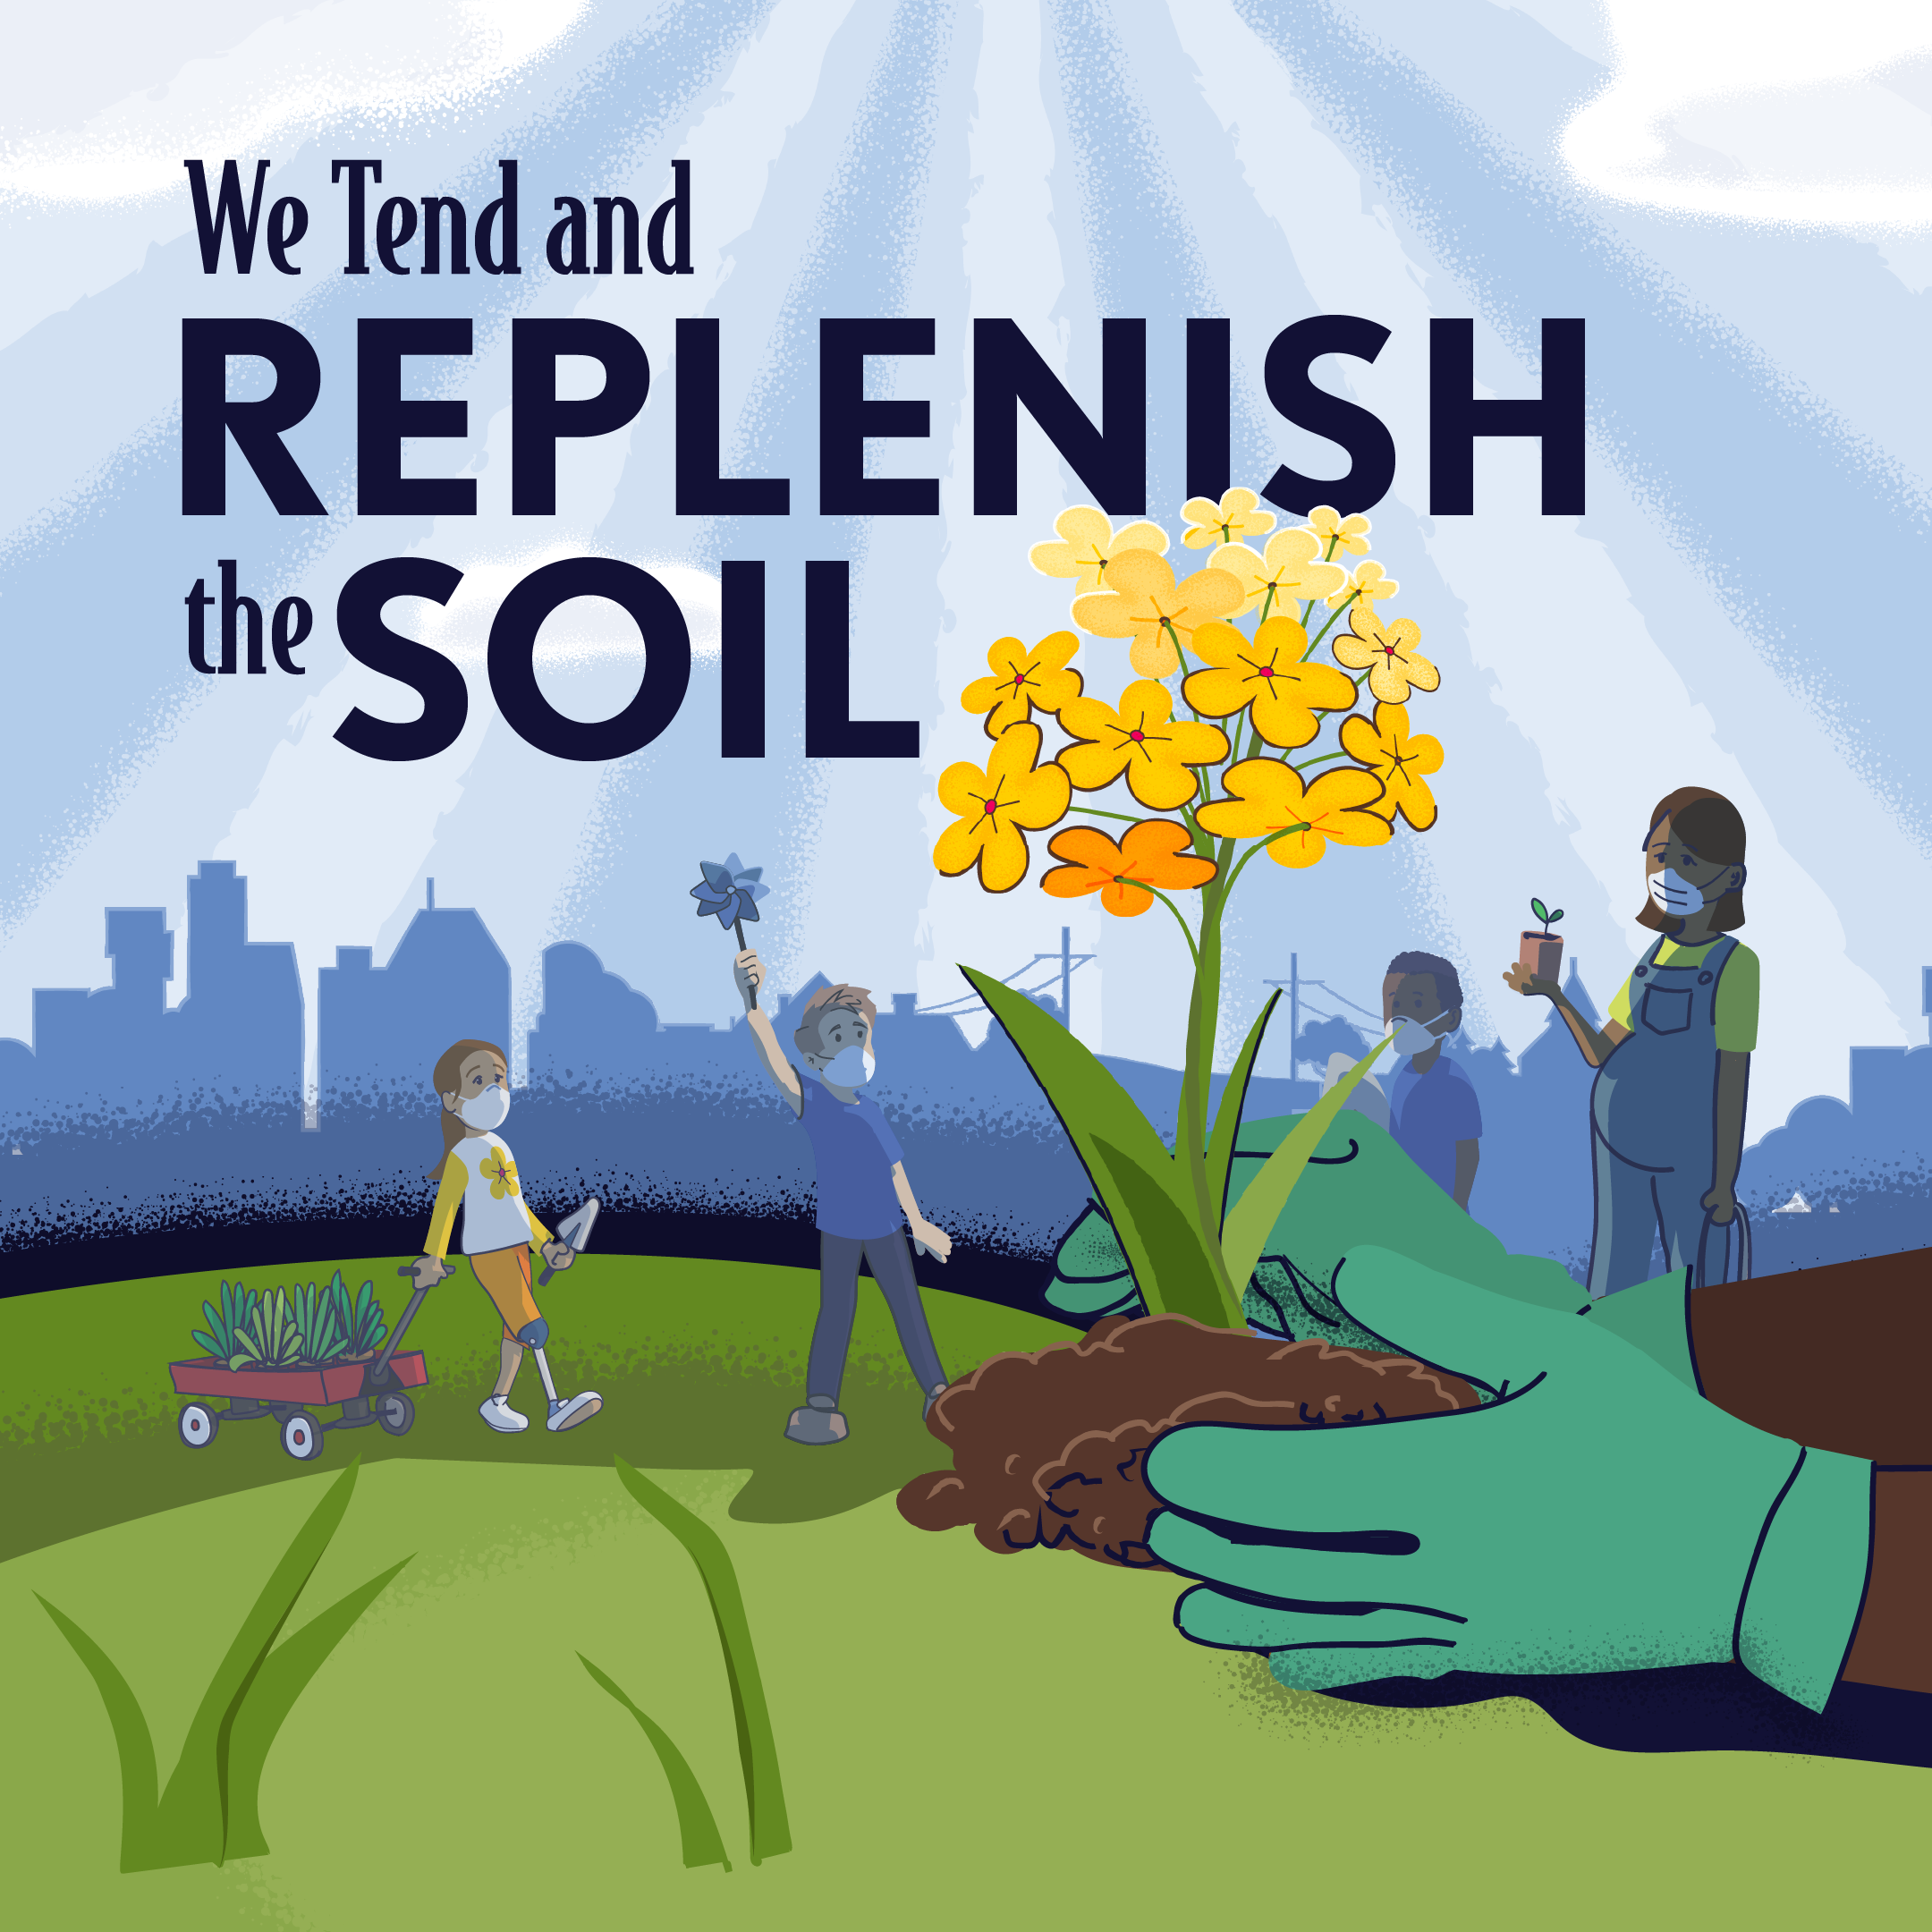 We tend and replenish the soil